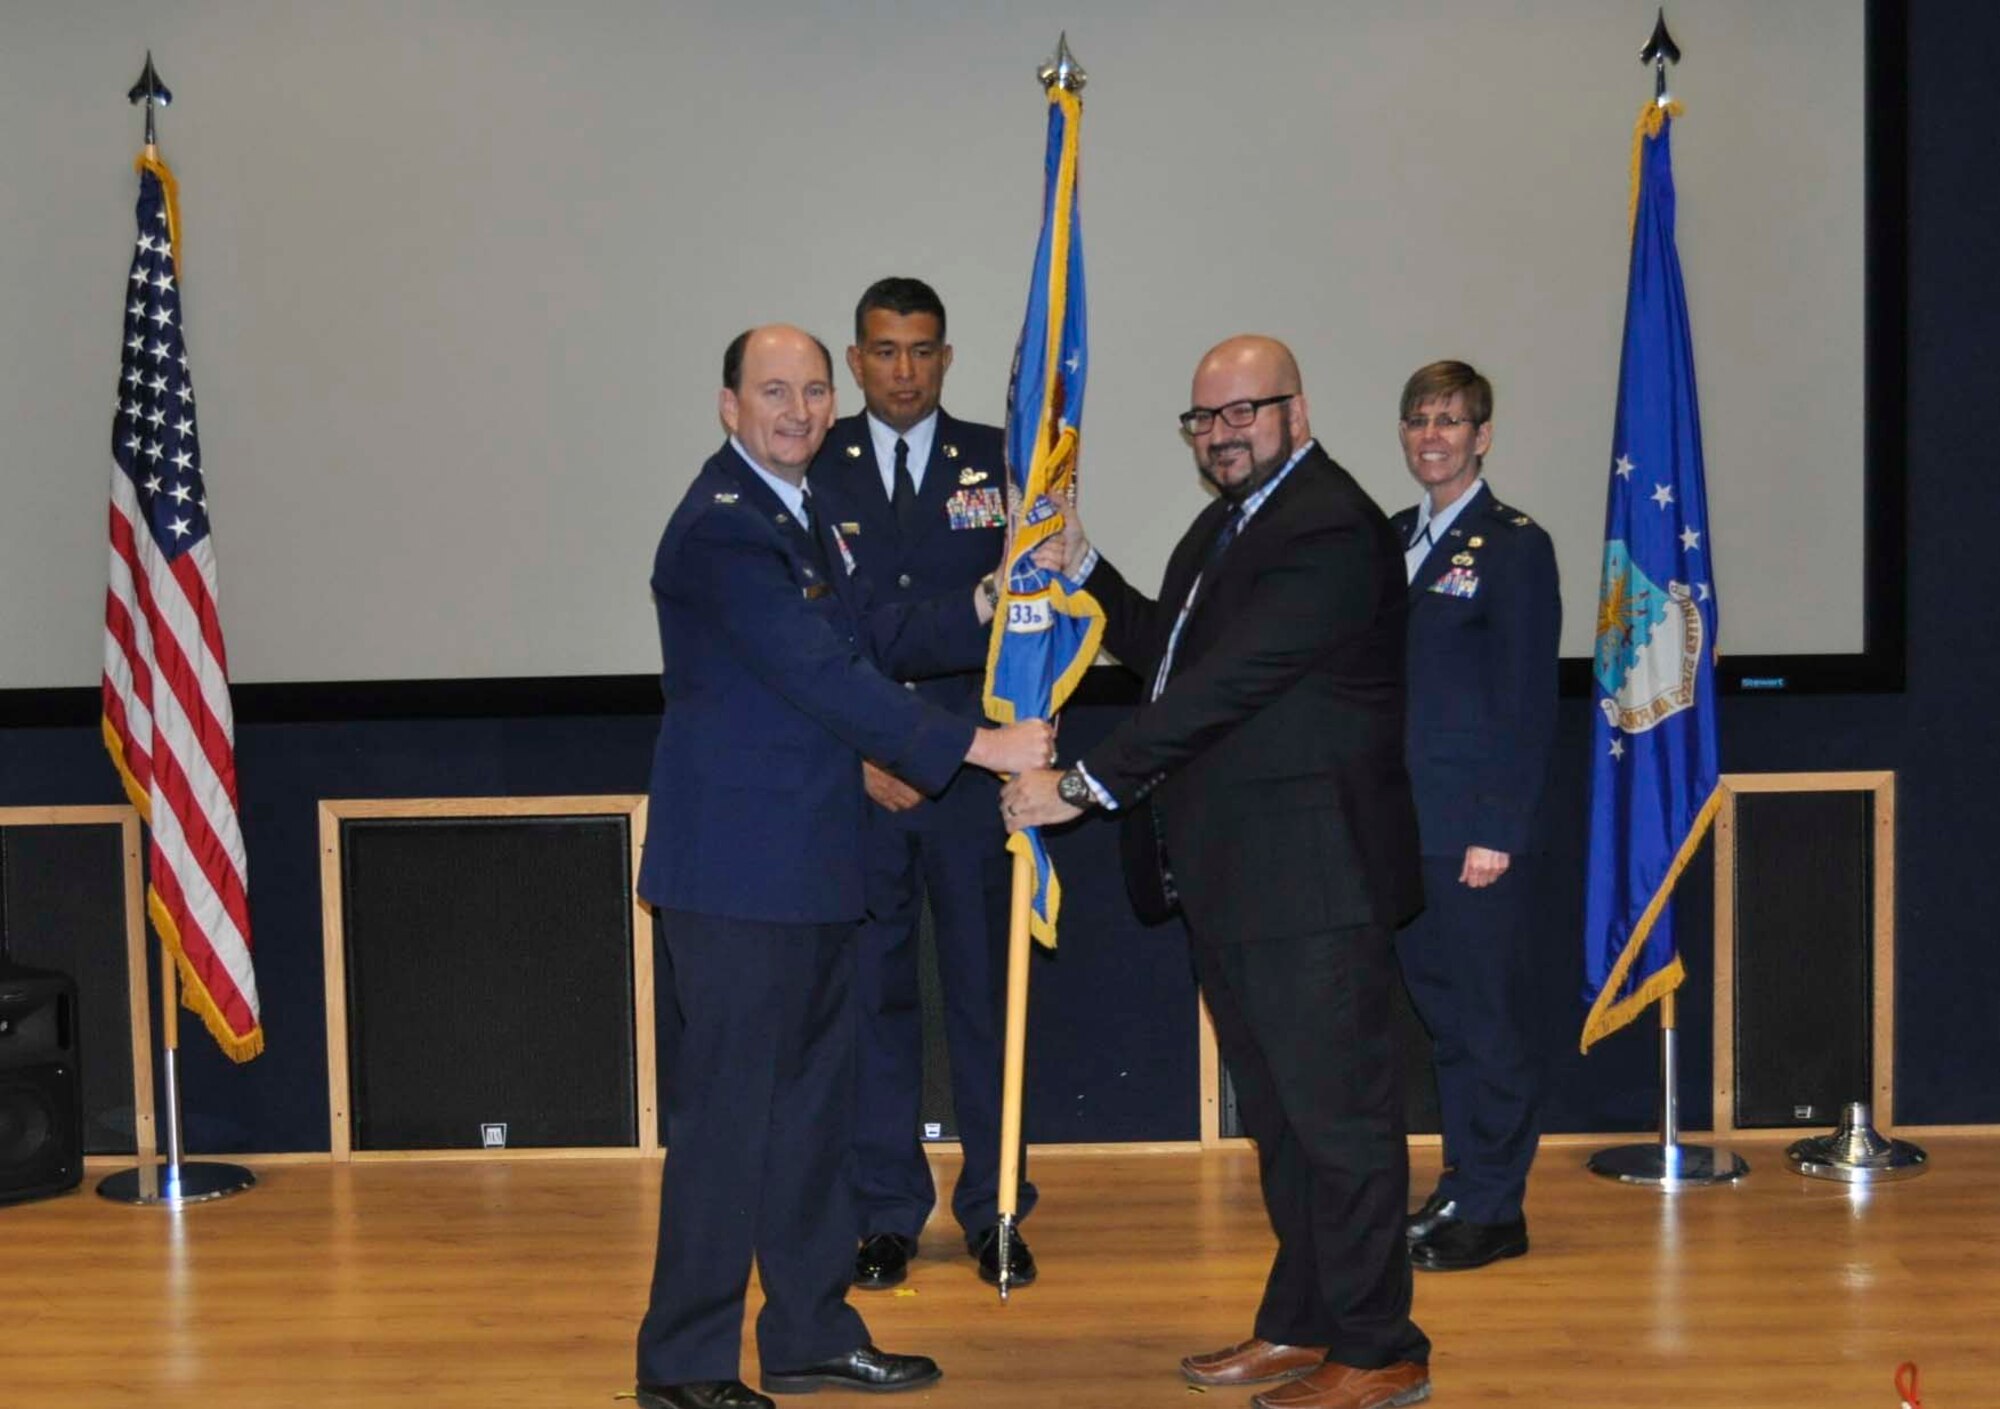 Philippe Place accepts the 433rd Airlift Wing guidon from Col. Thomas K. Smith, Jr., 433rd AW commander, during the Honorary Commanders Induction Ceremony held at Joint Base San Antonio-Lackland April 30, 2016. Place is the general manager of Southerleigh Fine Food and Brewery and will be serving as the 433rd Maintenance Group Honorary Commander. (U.S. Air Force photo/Senior Airman Bryan Swink)